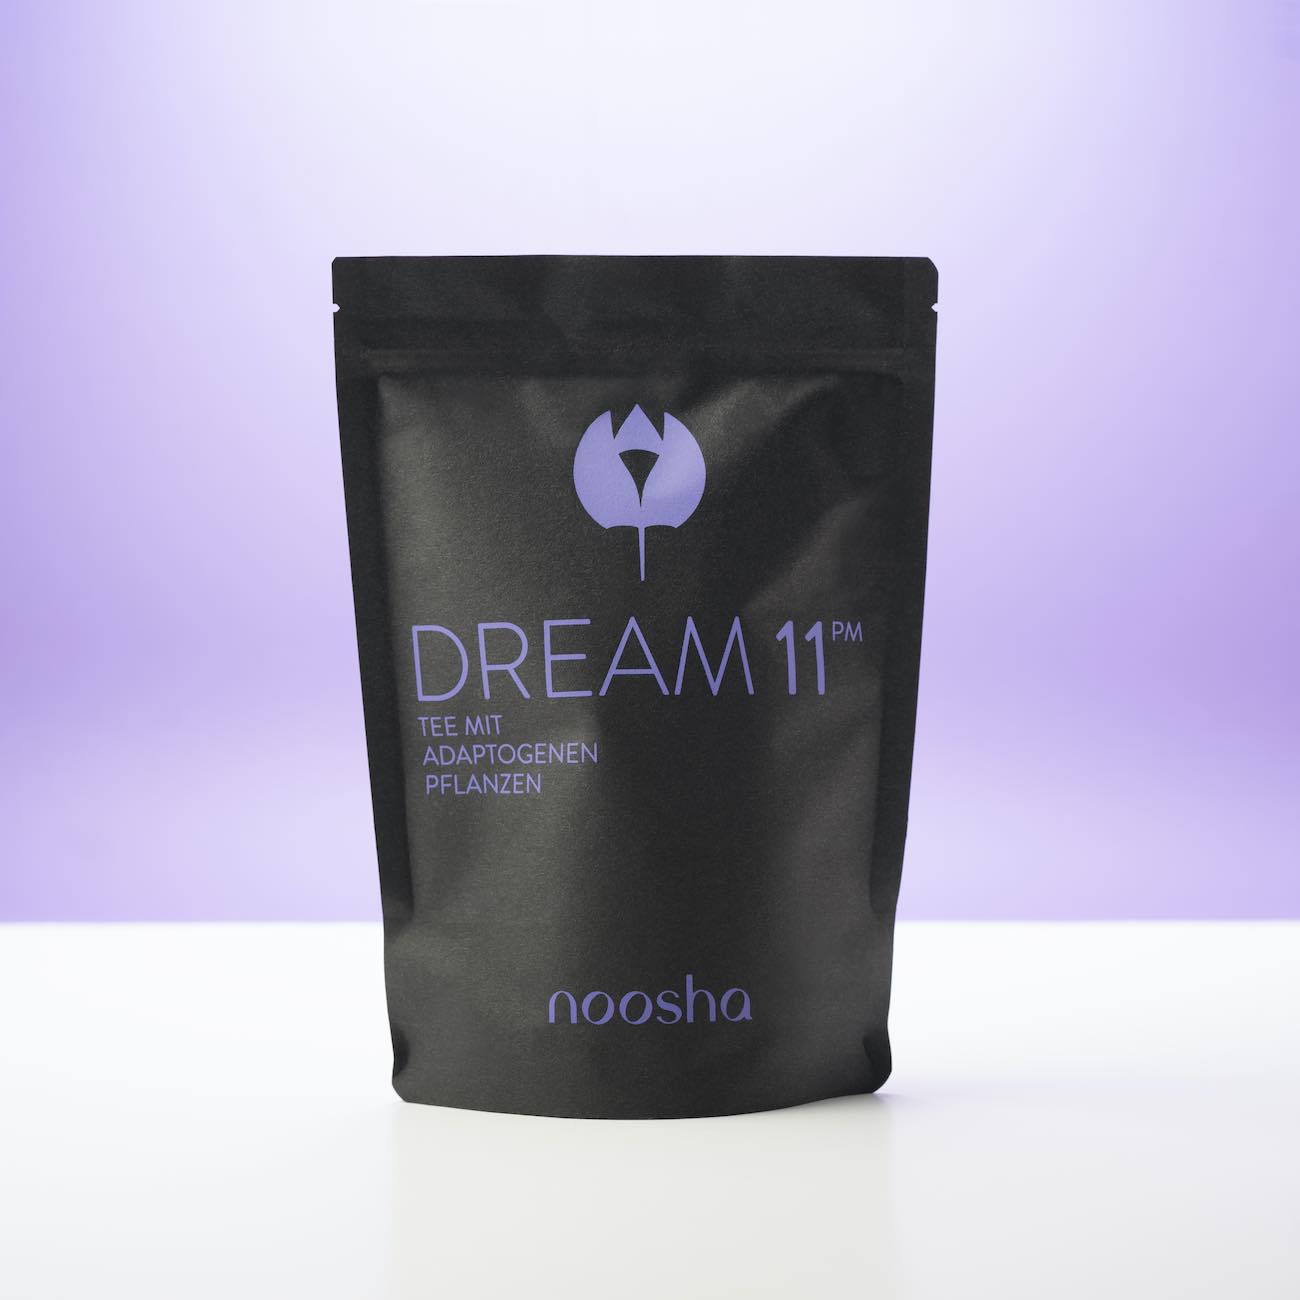 Packaging of DREAM 11PM tea made by noosha